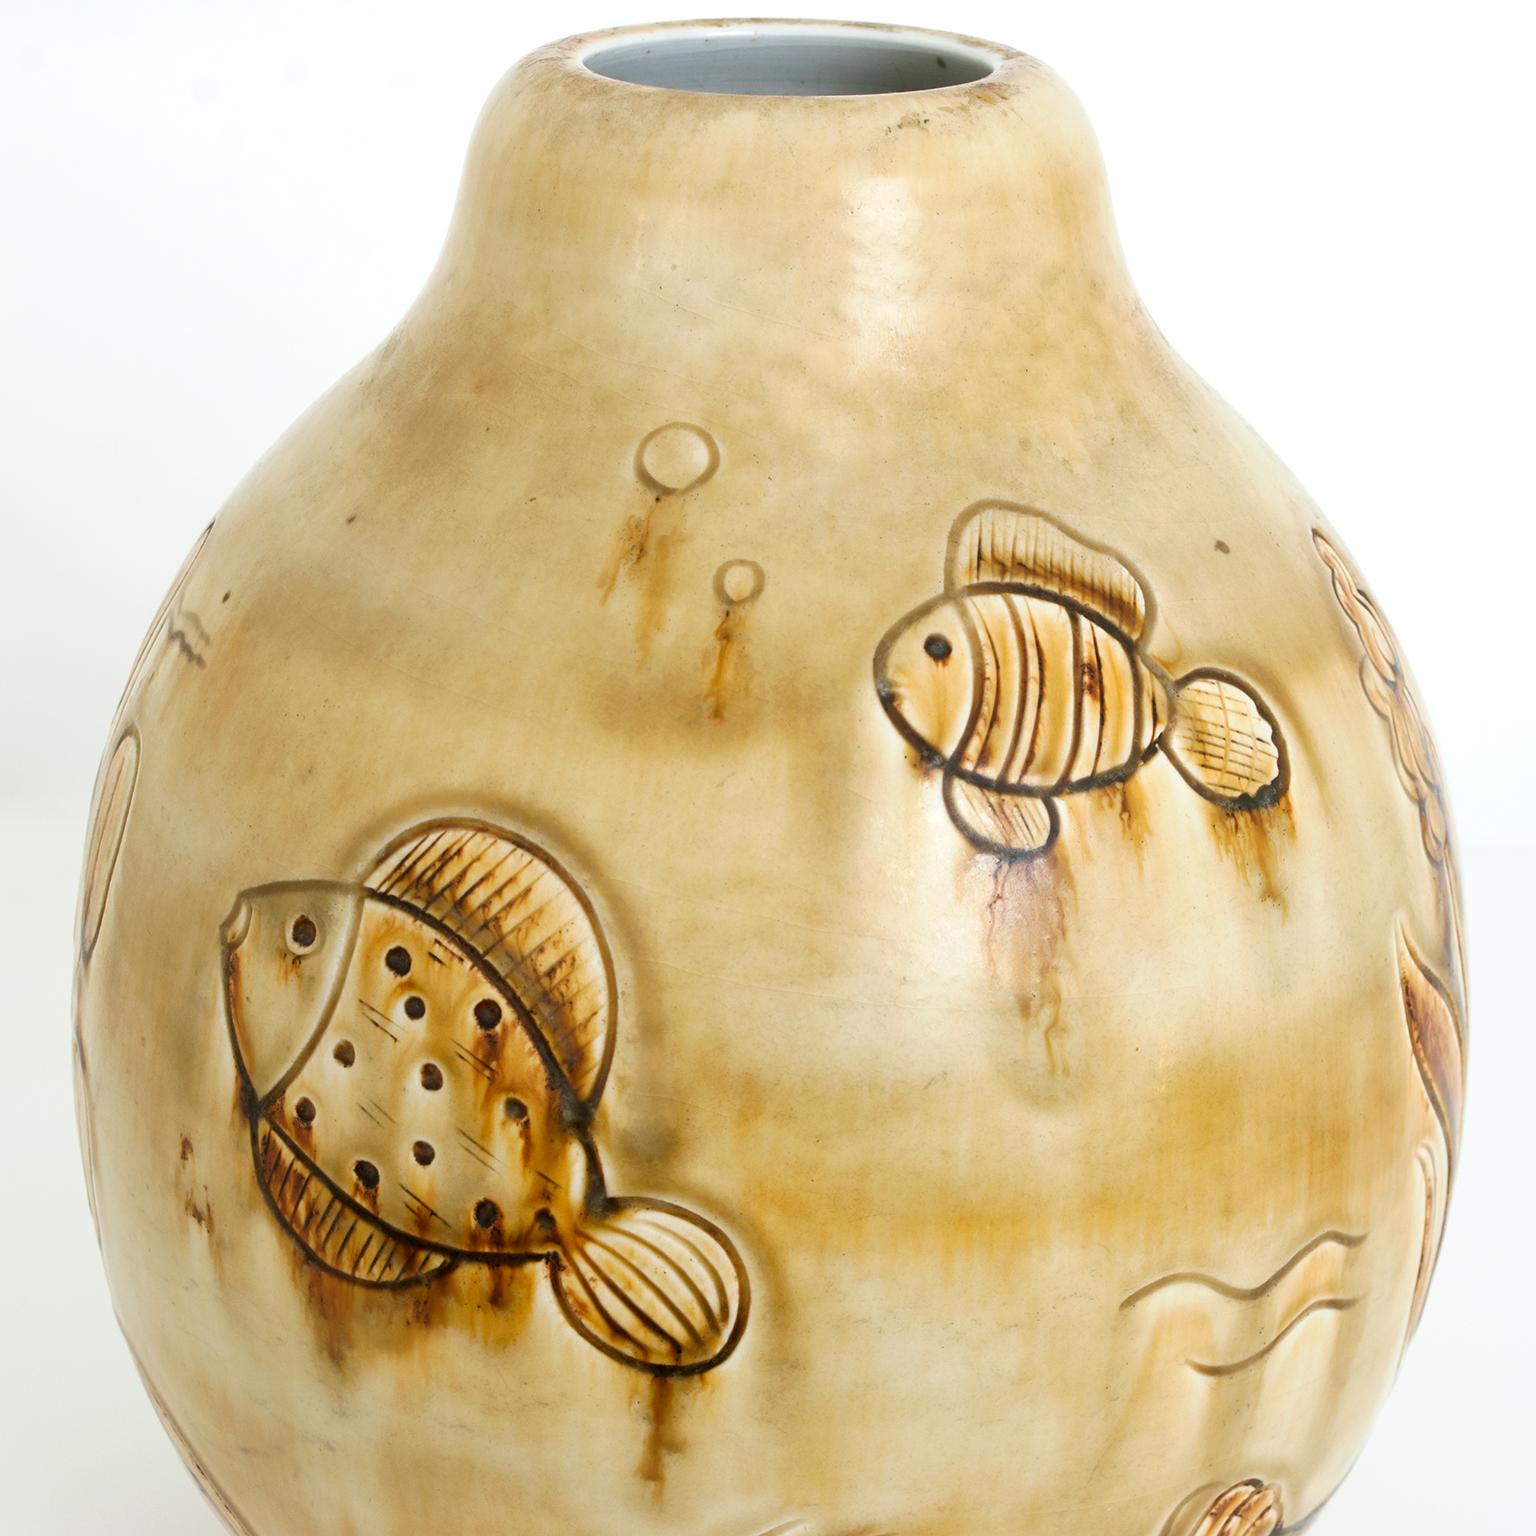 Gertrud Lonegren Group of Three Ceramic Vases with Fish Motif for Rorstrand In Good Condition For Sale In New York, NY